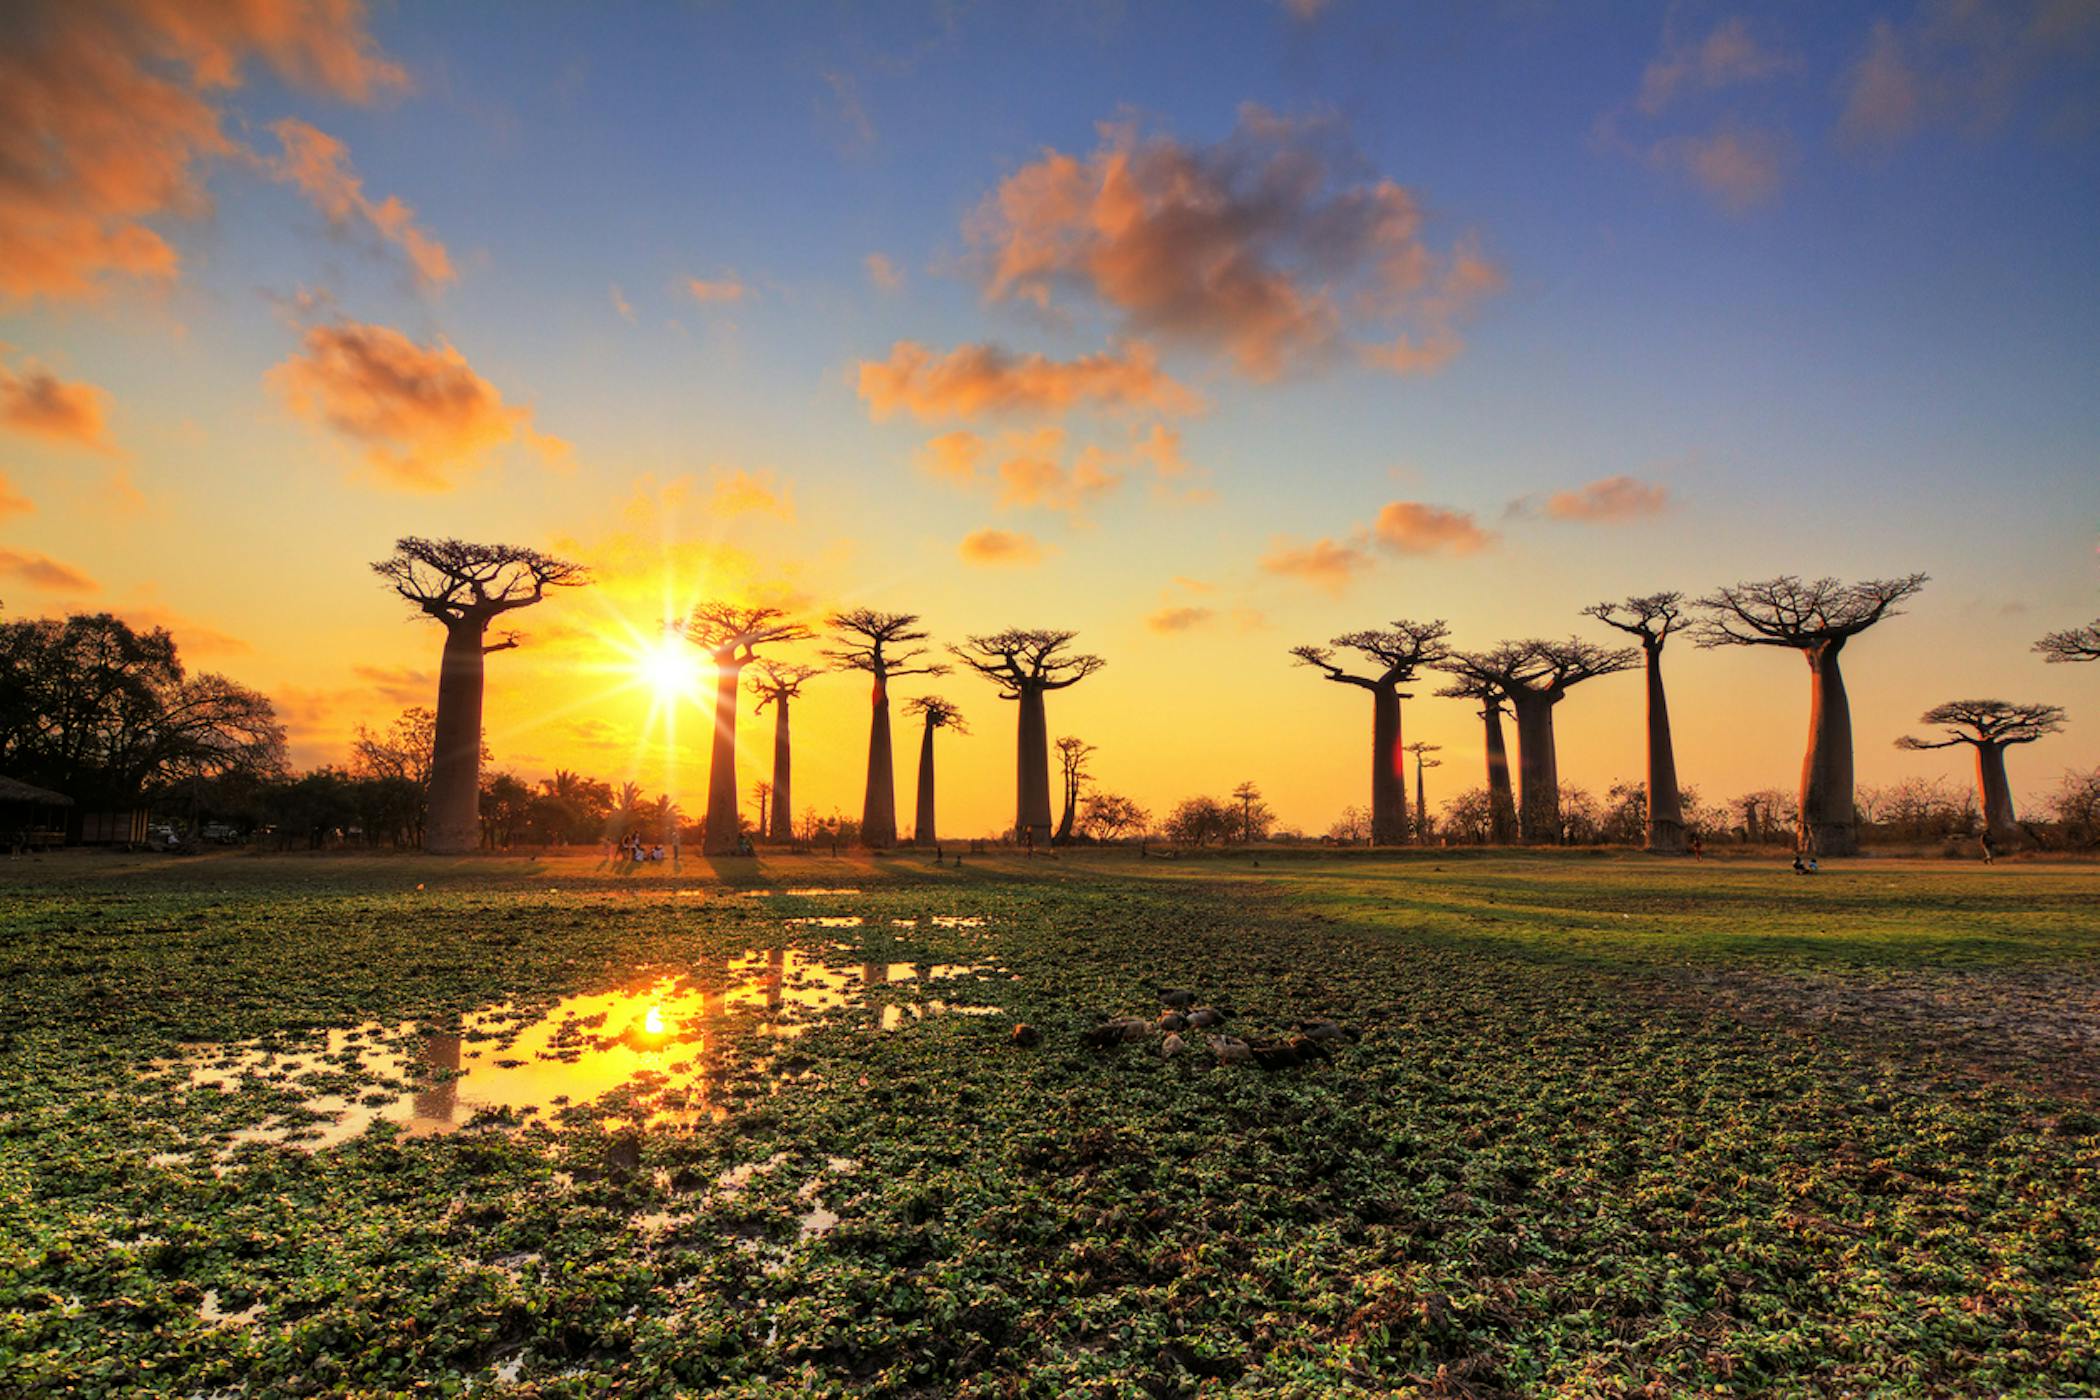 Sweeping vistas, ancient baobabs and African sunsets: welcome to Madagascar